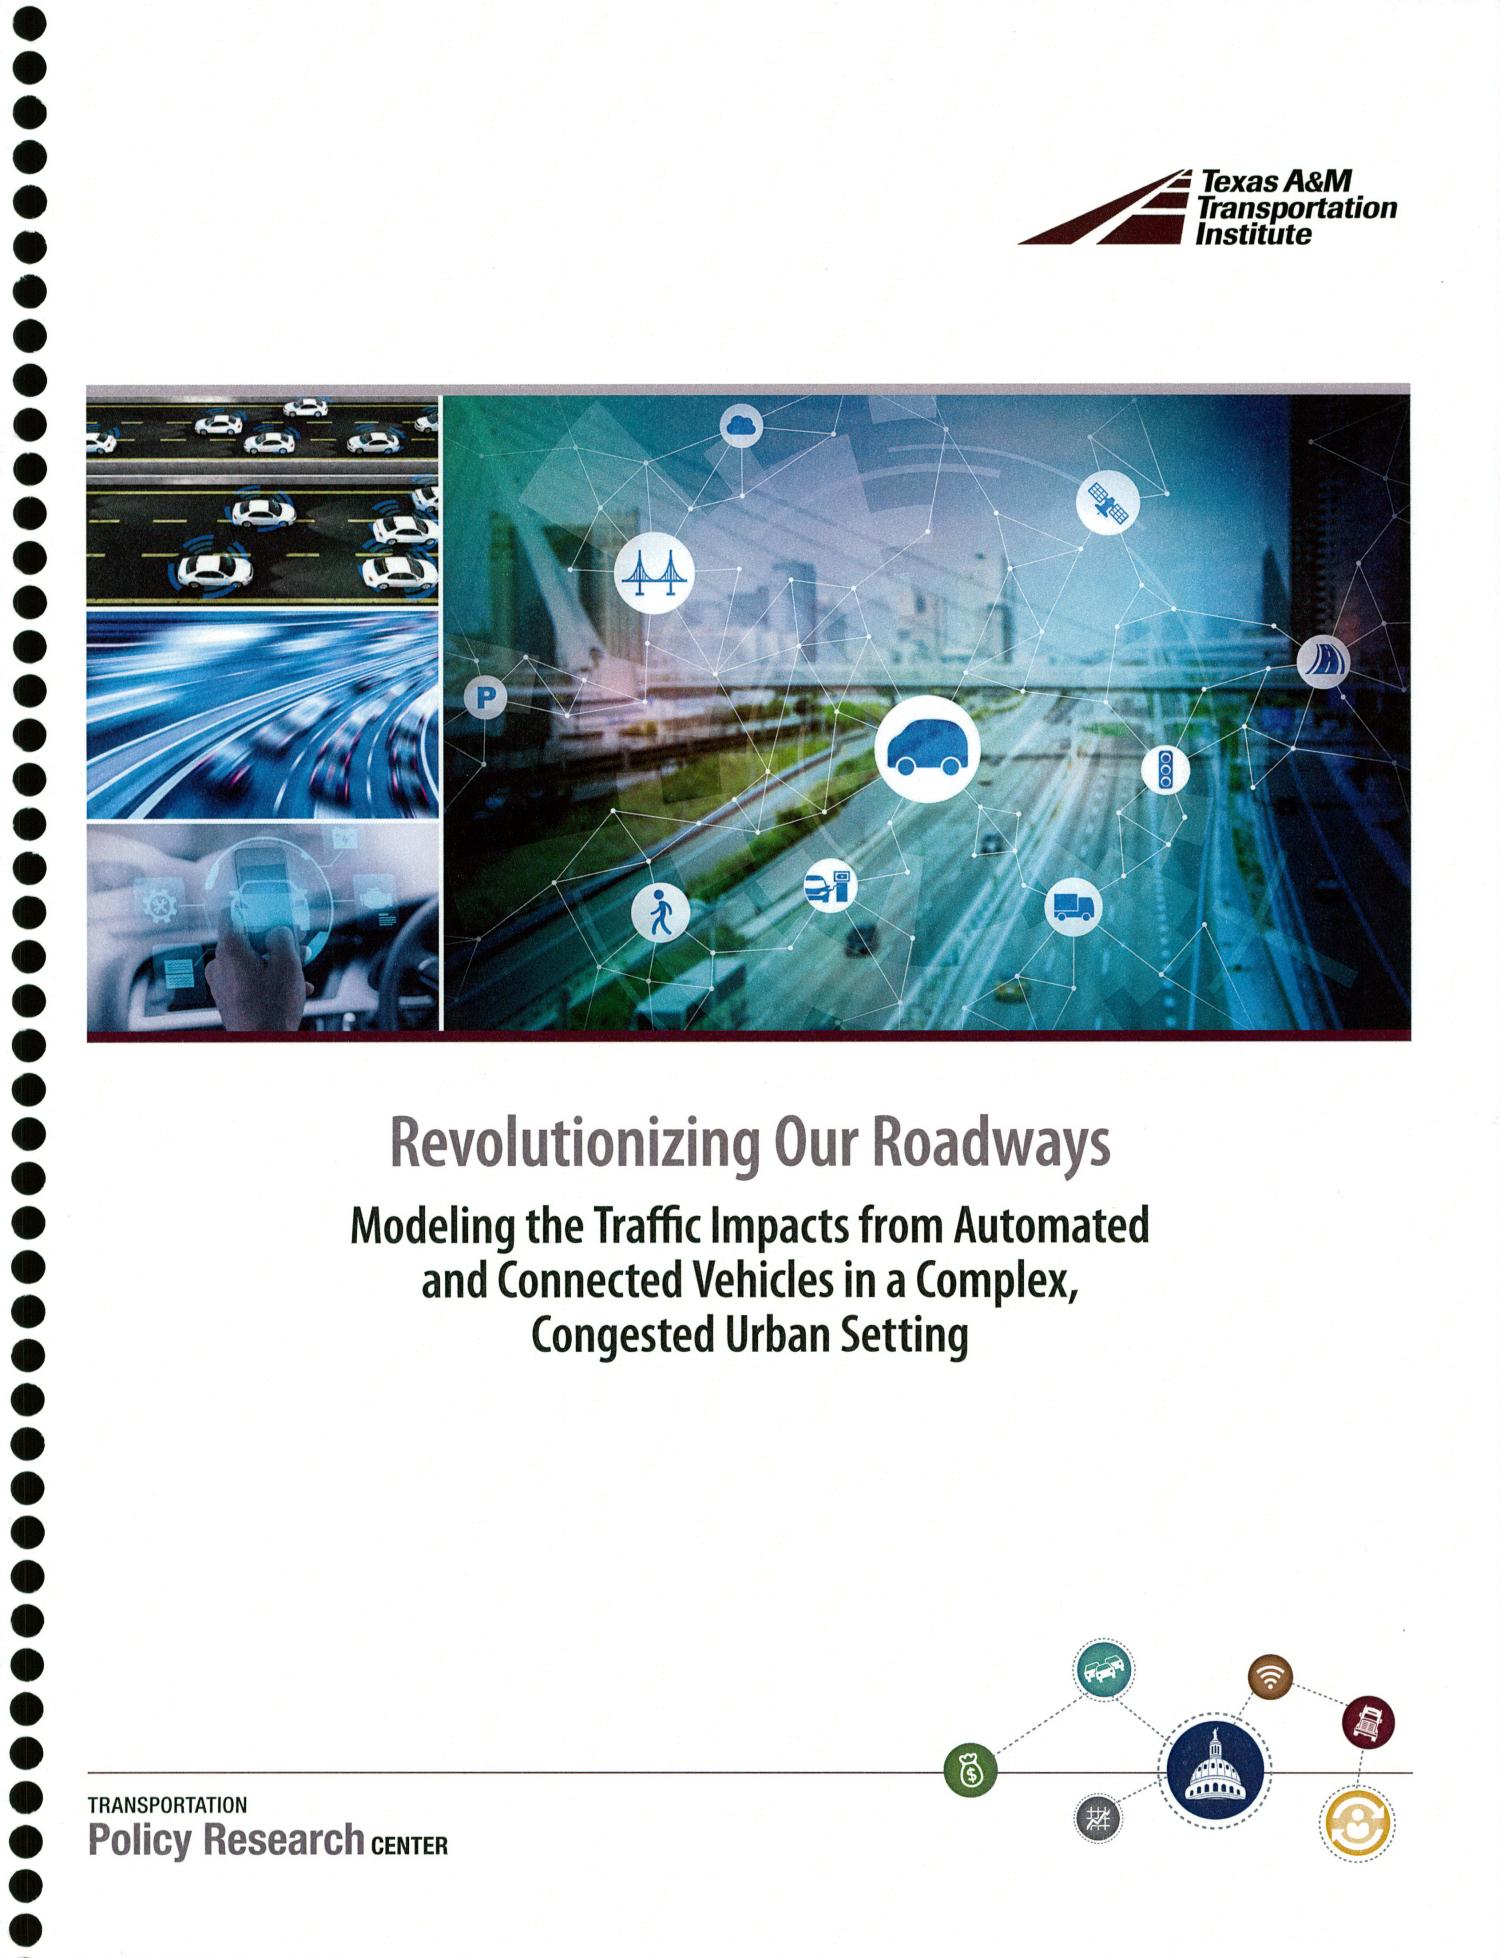 Revolutionizing Our Roadways: Modeling the Traffic Impacts From Automated and Connected Vehicles in a Complex, Congested Urban Setting
                                                
                                                    FRONT COVER
                                                